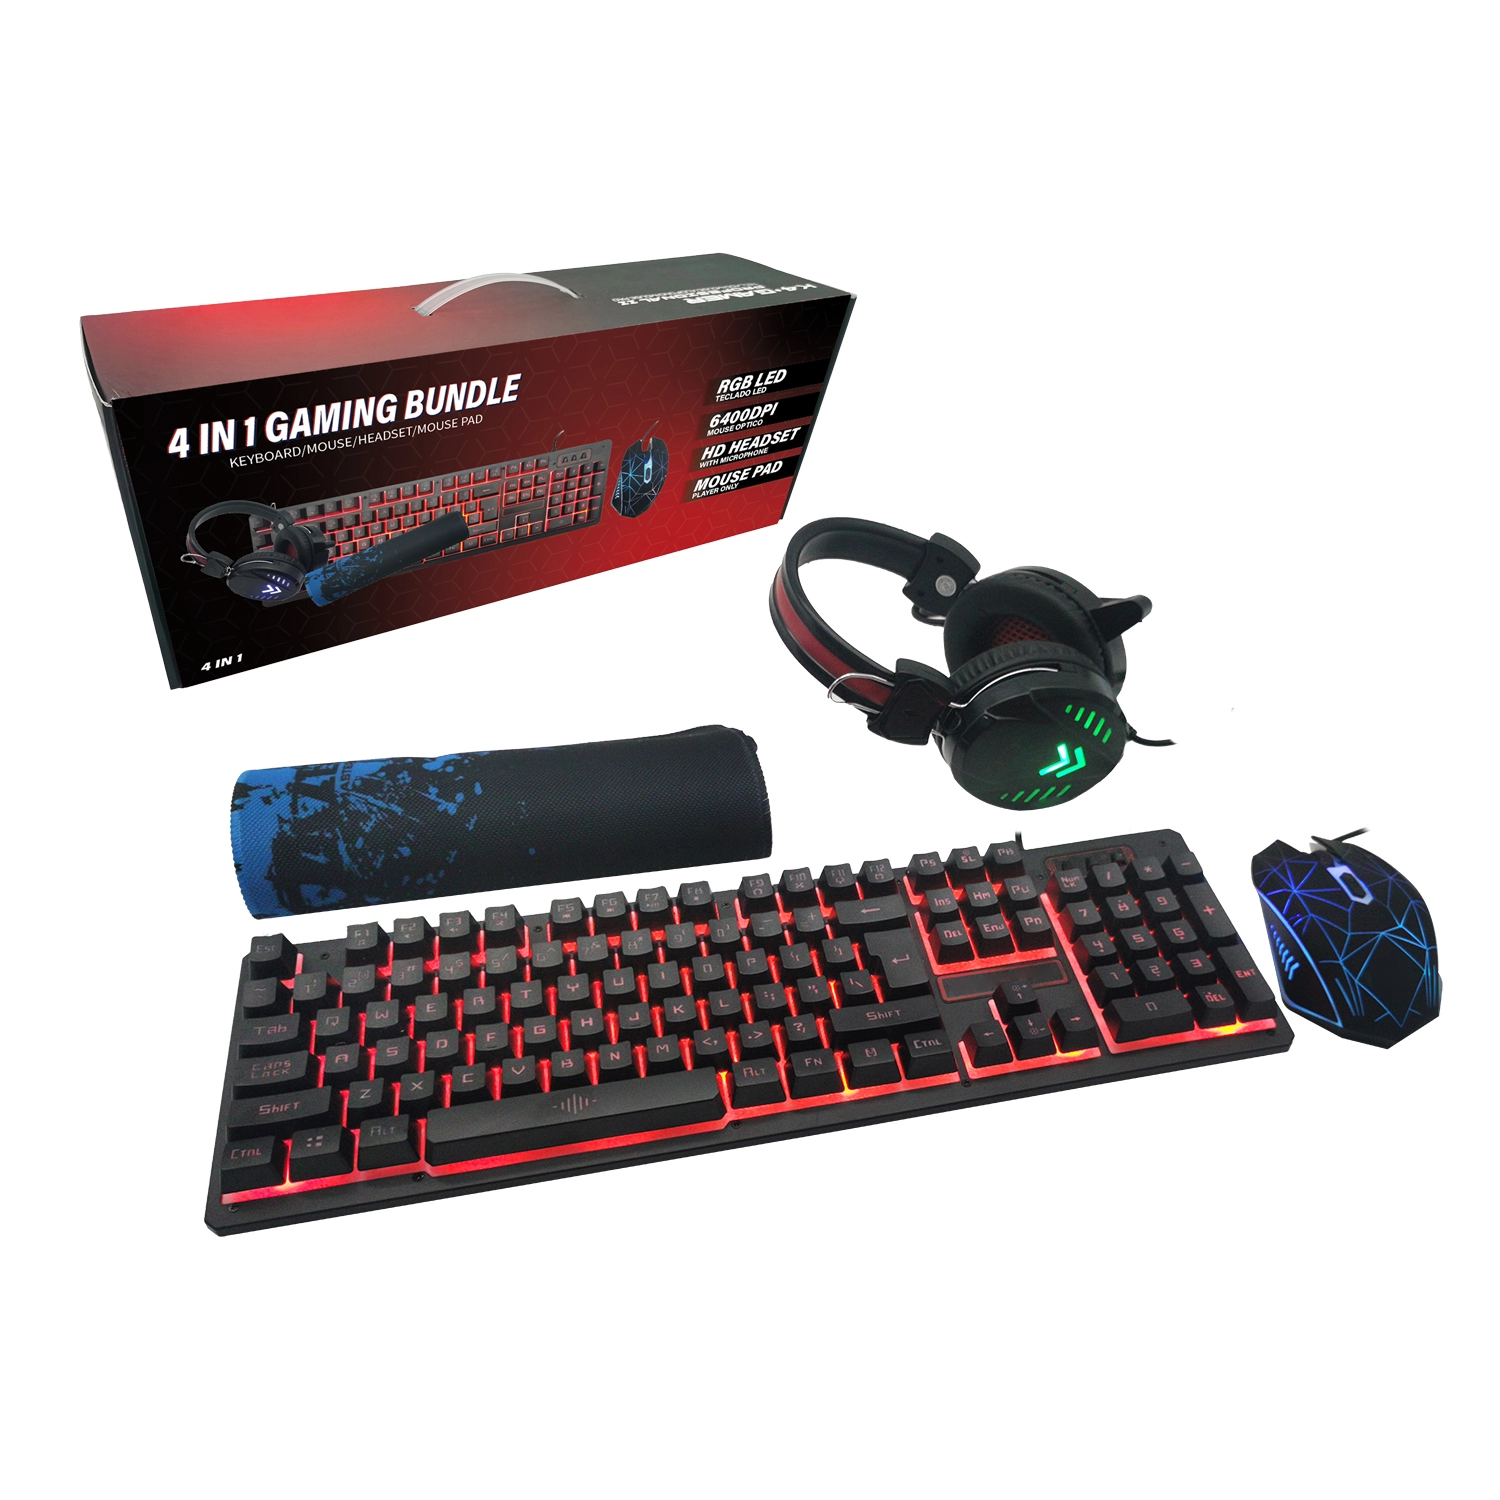 https://www.xgamertechnologies.com/images/products/4 in 1 RGB Gaming Bundle Keyboard_Mouse_Mouse Pad_Headset for Gamers.webp